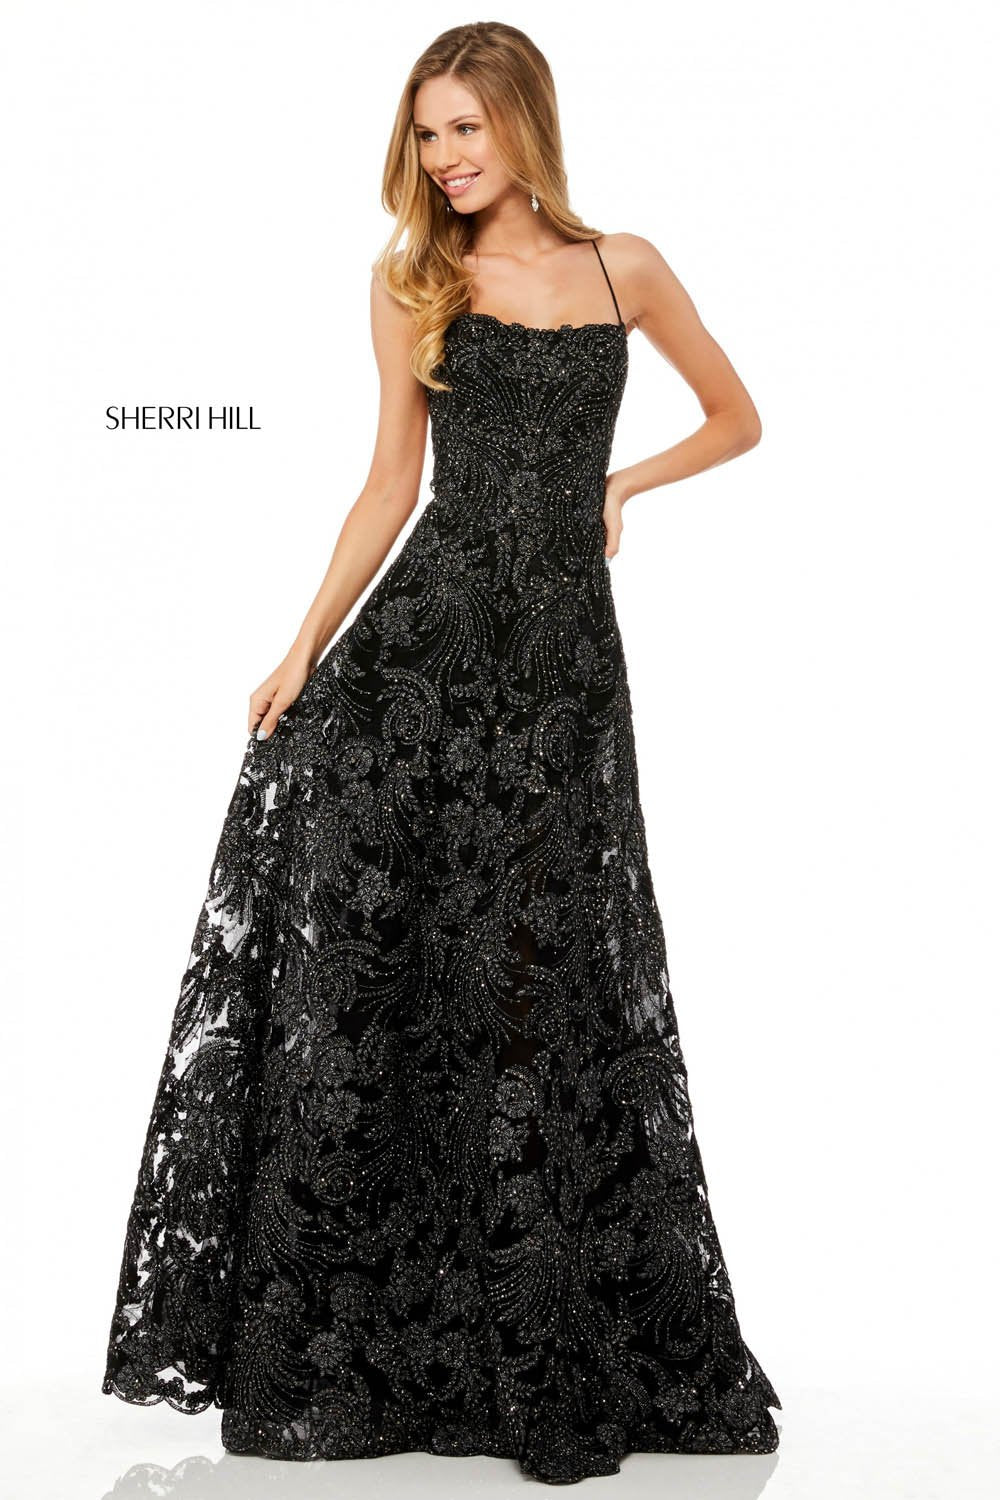 Sherri Hill 52240 dress images in these colors: Black.